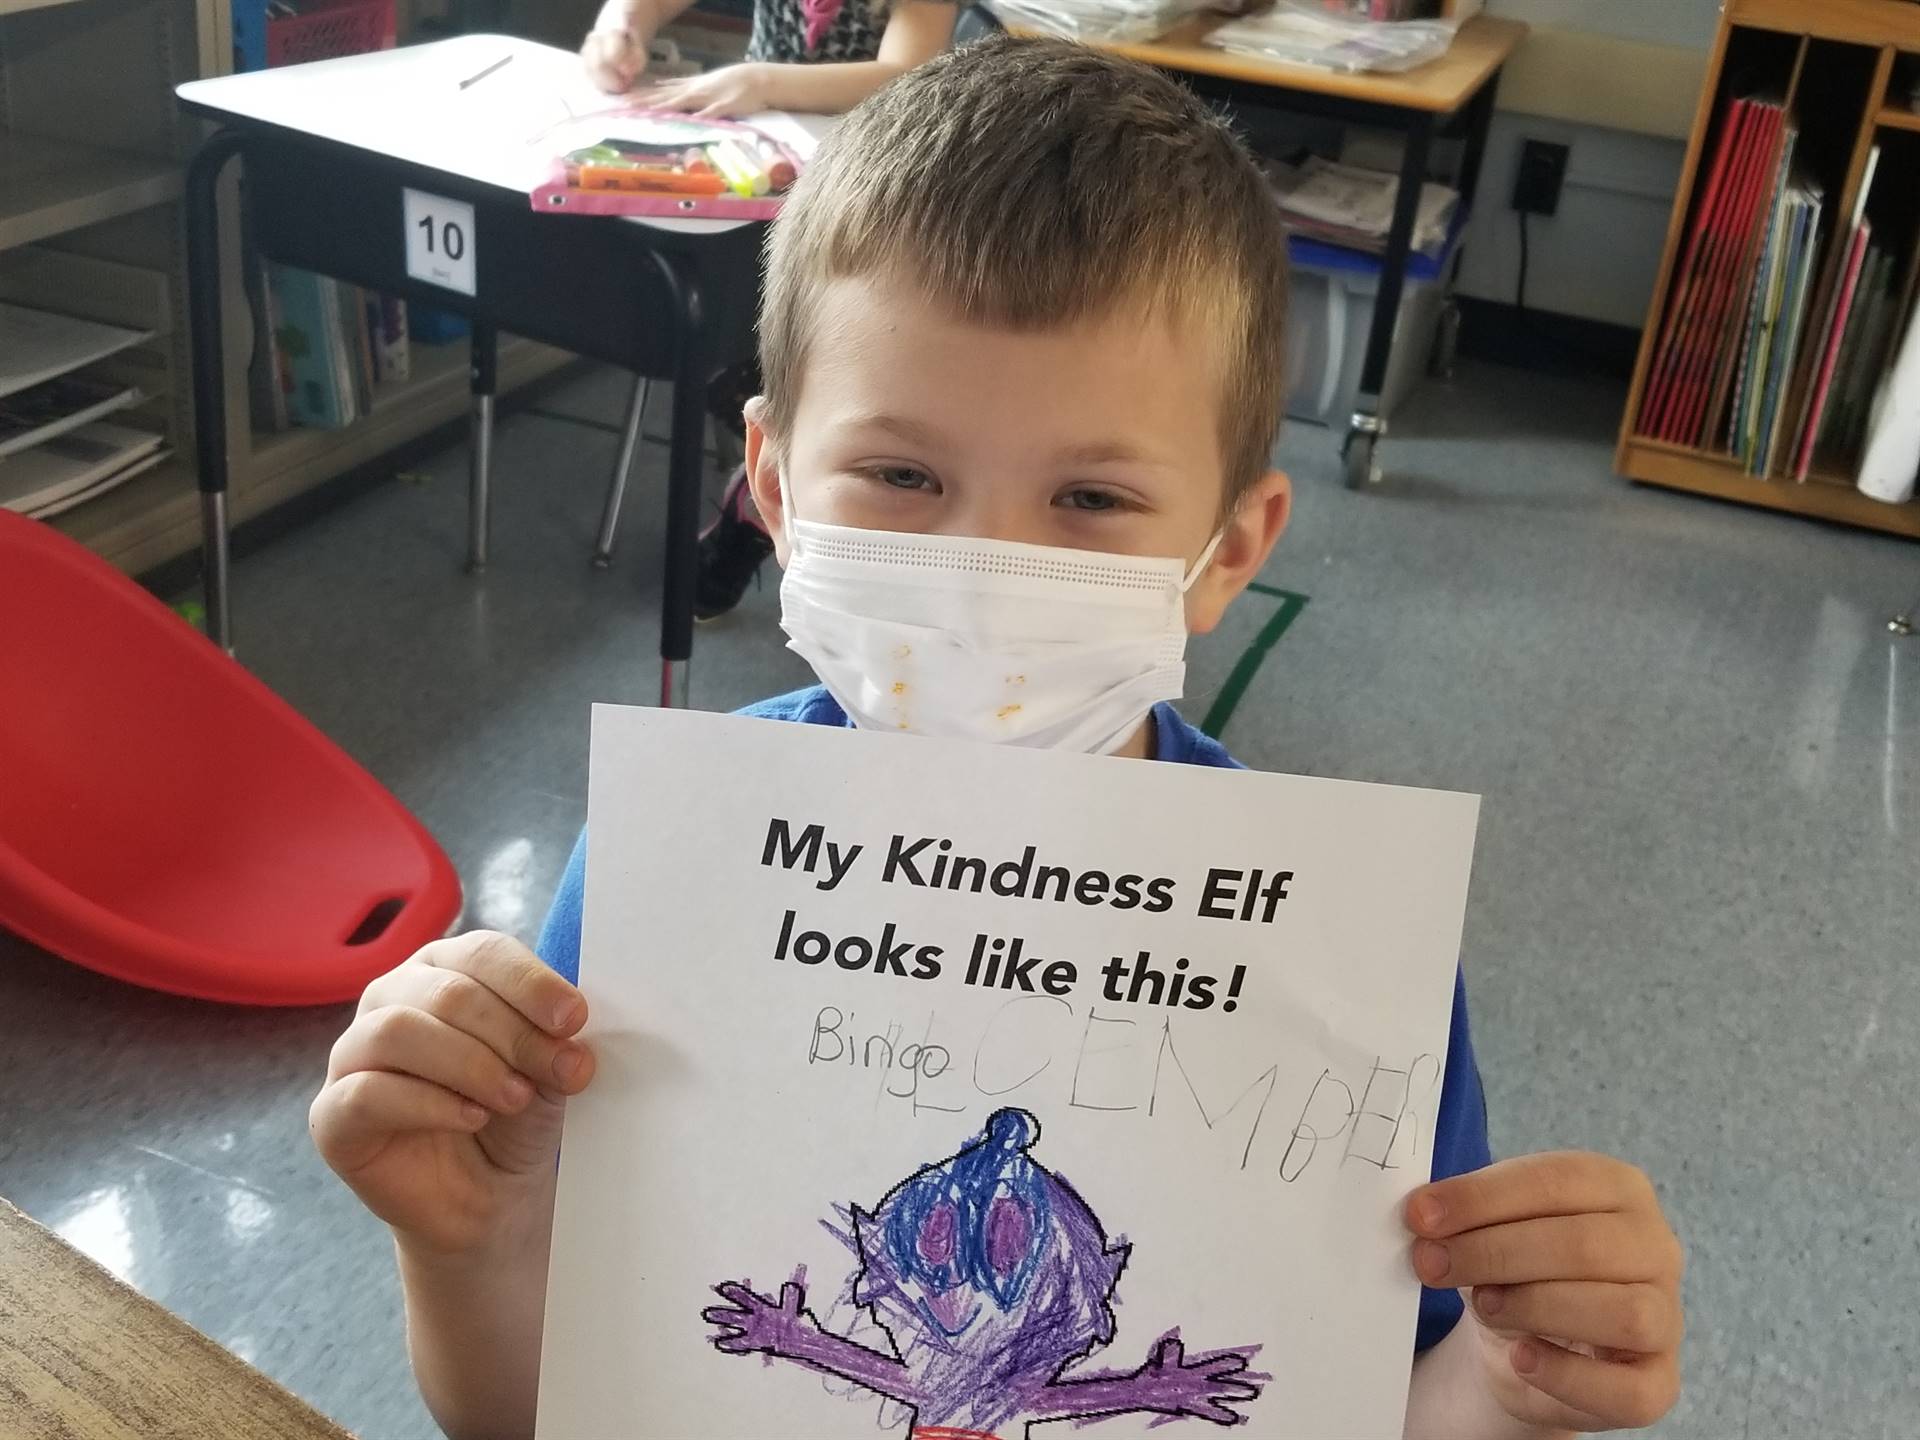 students shows a colored page of the kindness elf